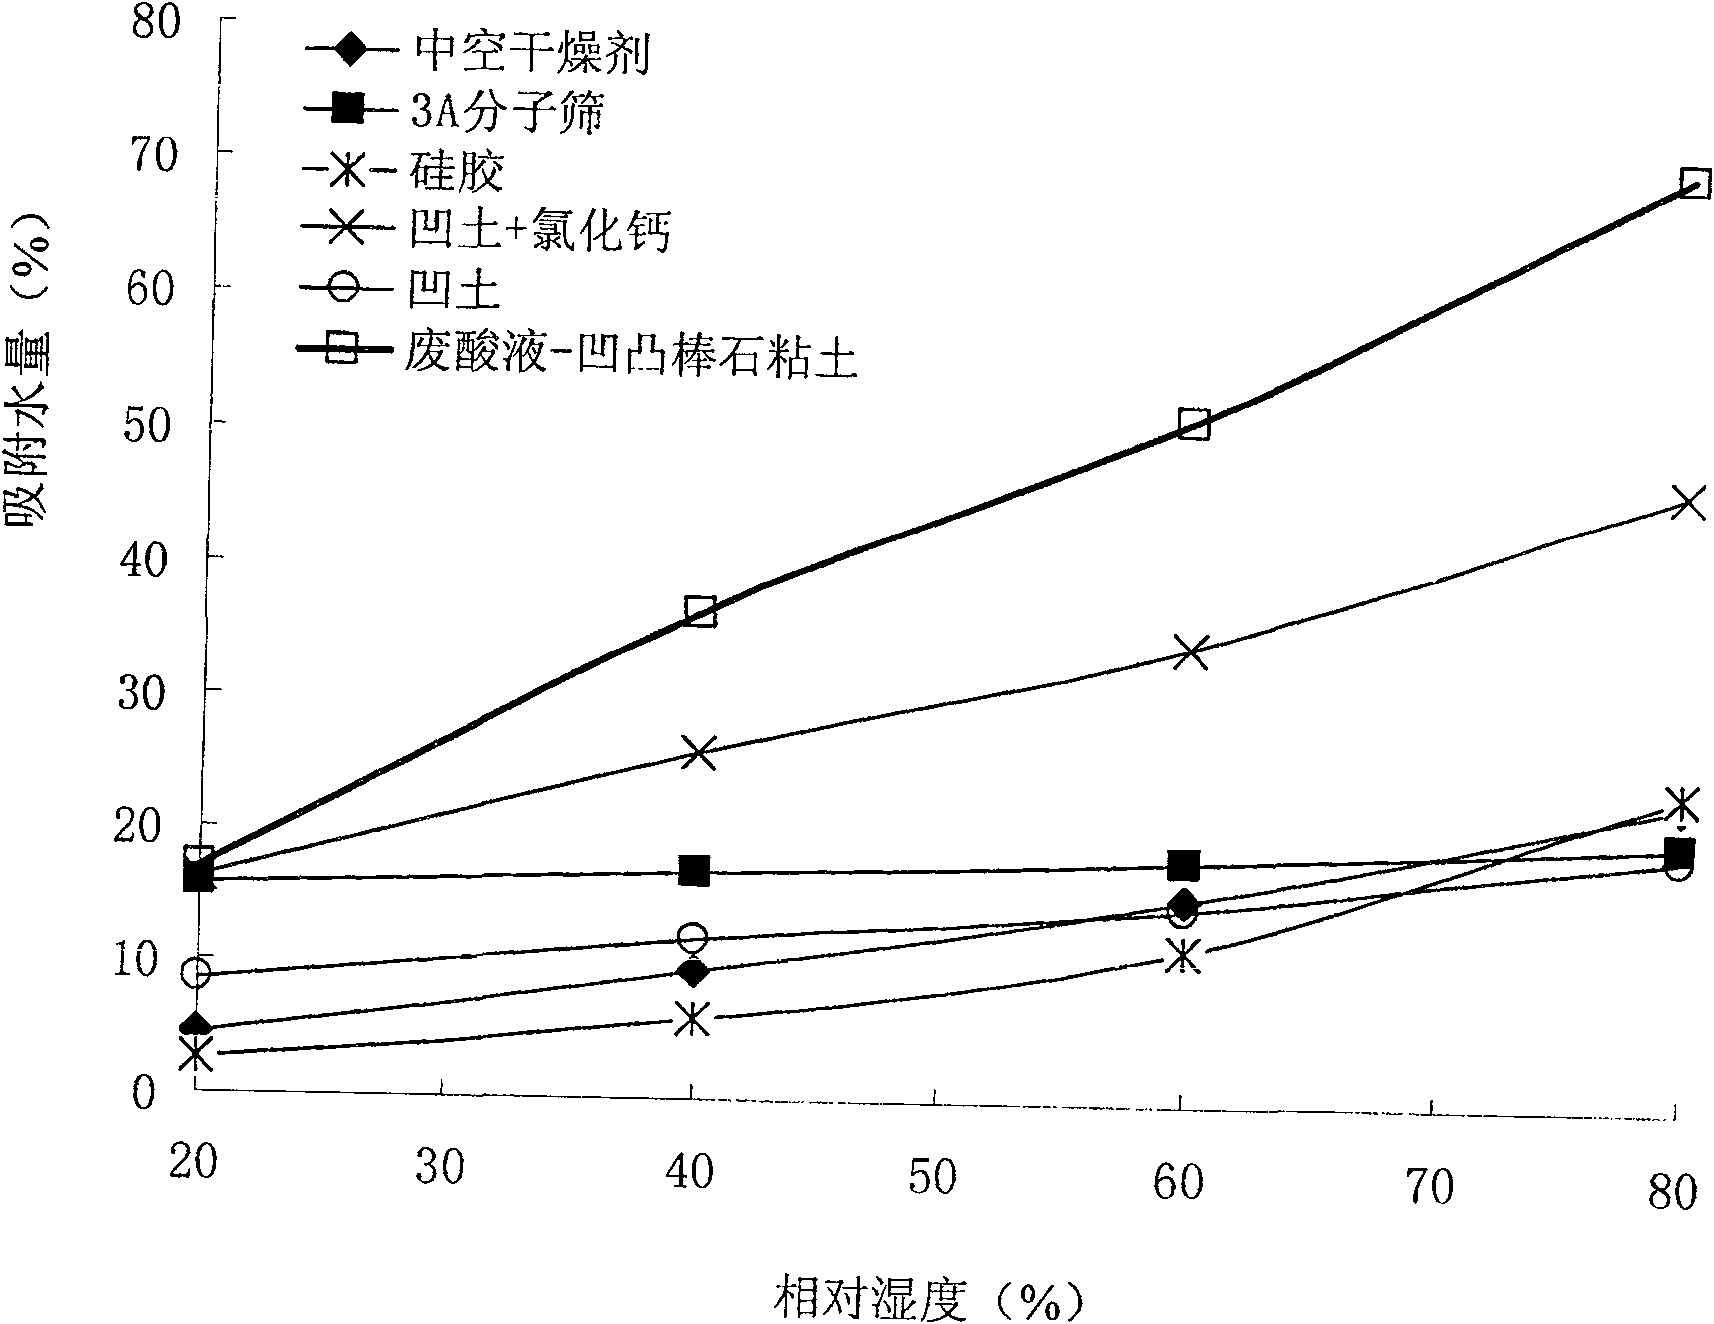 Method for processing industrial waste acid solution and preparing drying agent by using dolomite-containing attapulgite clay